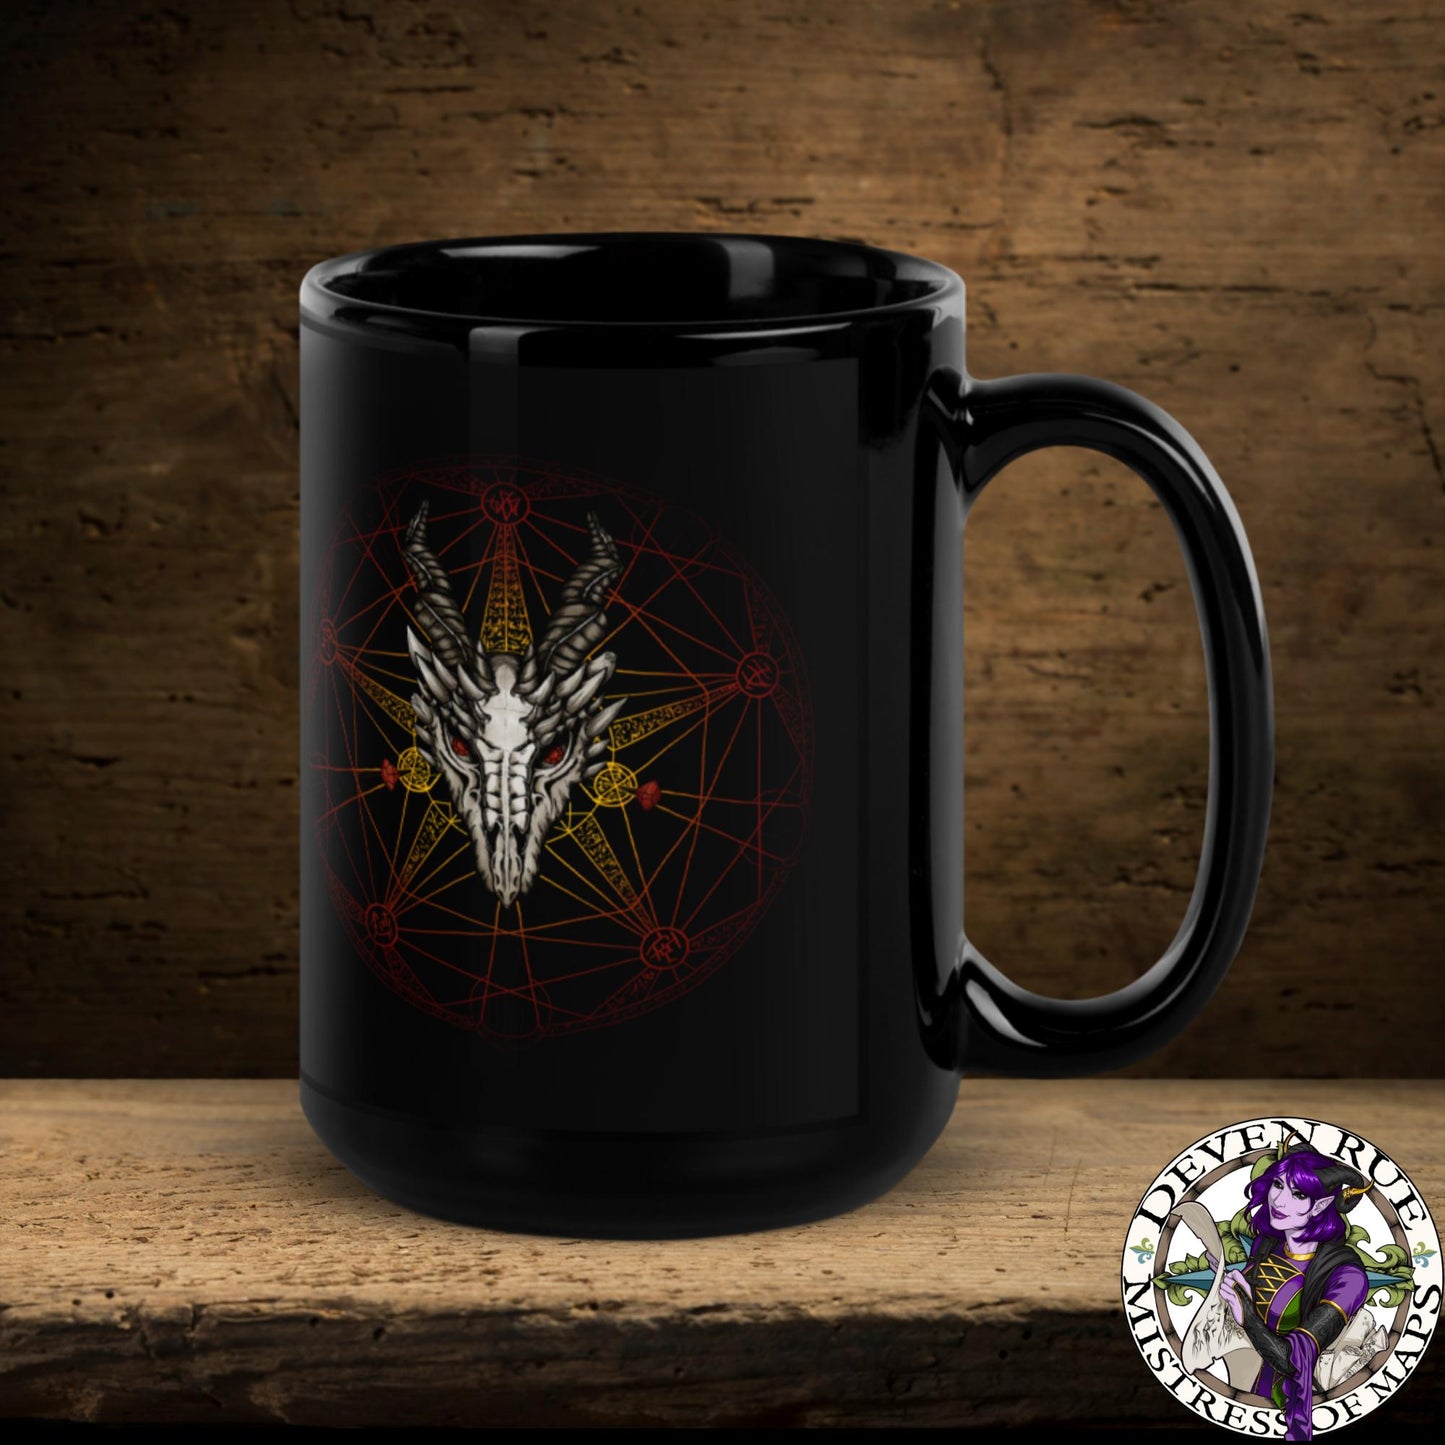 The 15 oz black mug has the red dragon summoning circle printed on it, appearing out of the darkness.